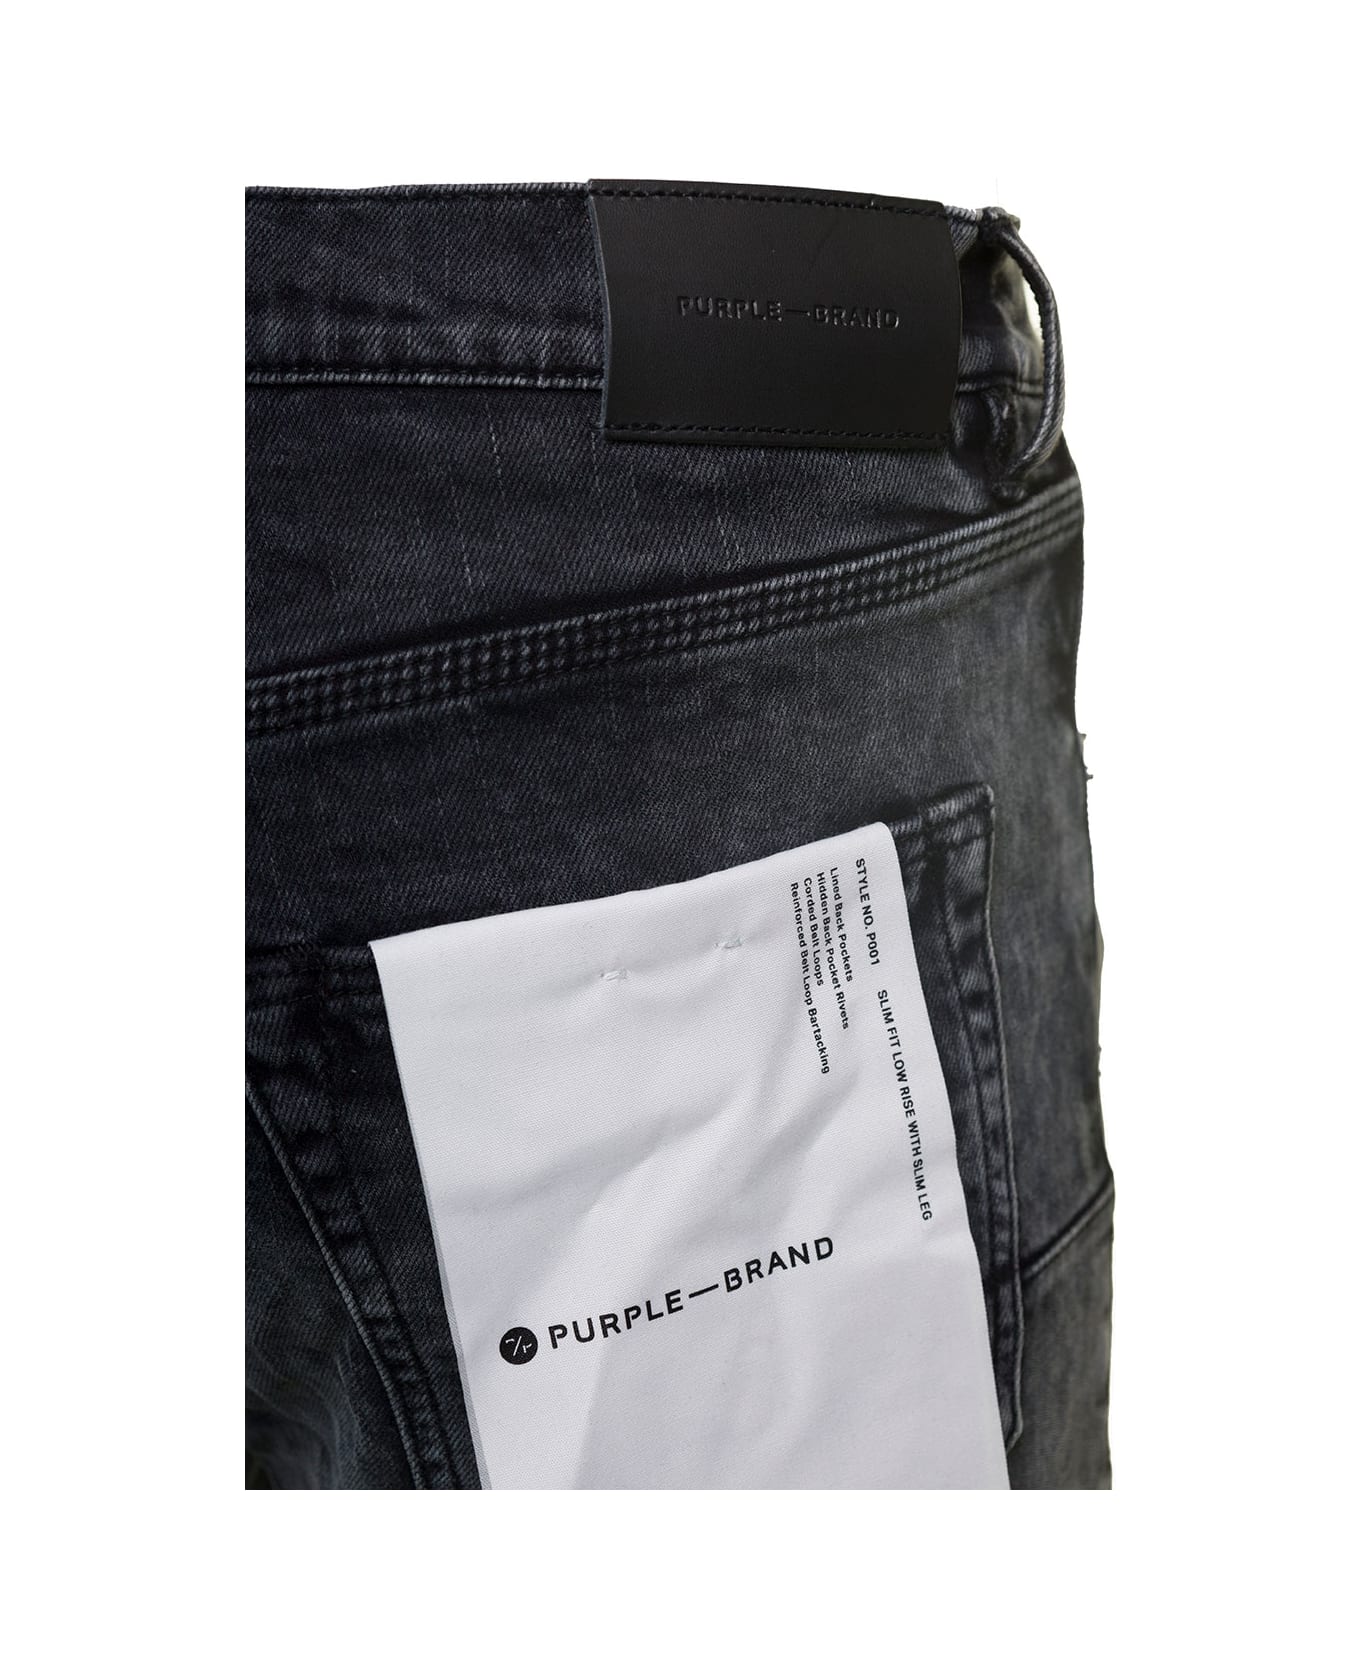 Purple Brand Black Skinny Jeans With Tonal Logo Patch And Crinkled Effect In Stretch Cotton Denim Man - Black